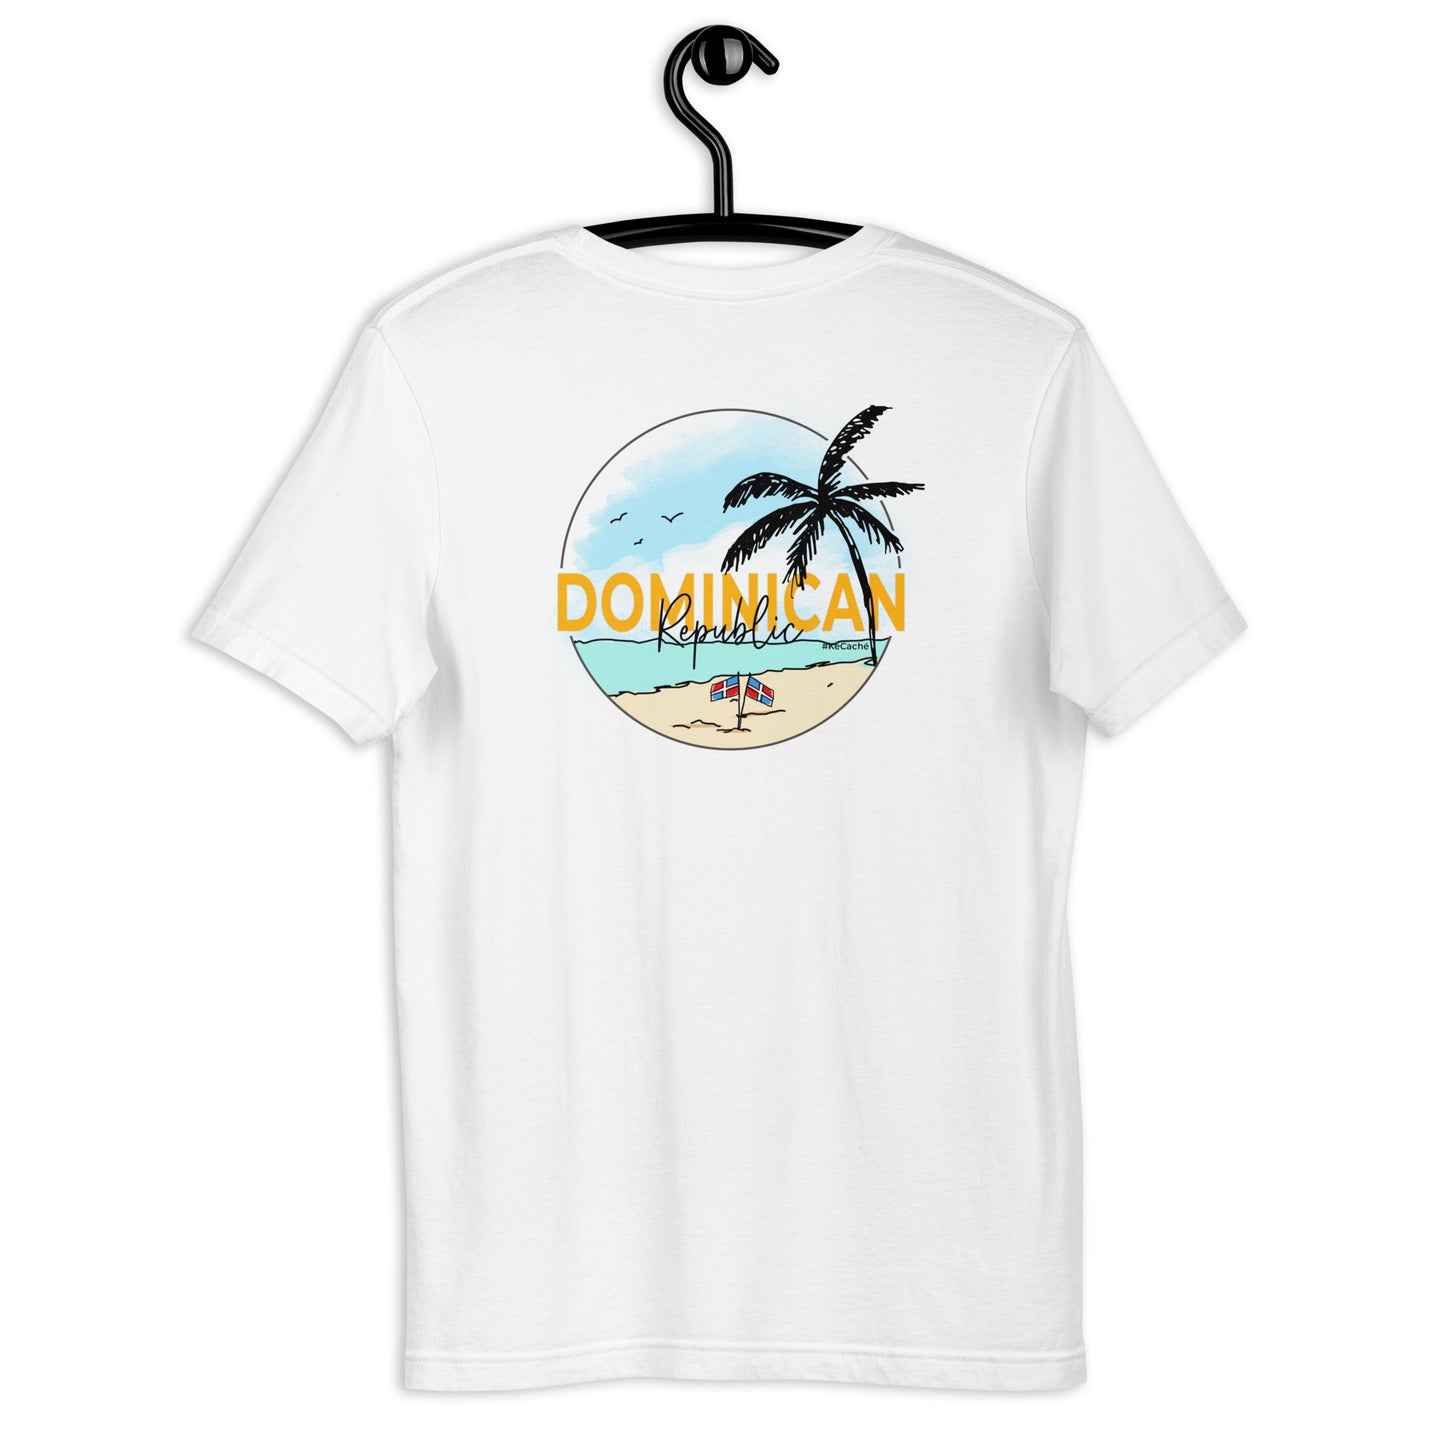 On the back, there is a serene beach scene with a palm tree, sun, and Dominican flags, all surrounding the words 'Dominican Republic.' Expresses Caribbean vibes and cultural pride.